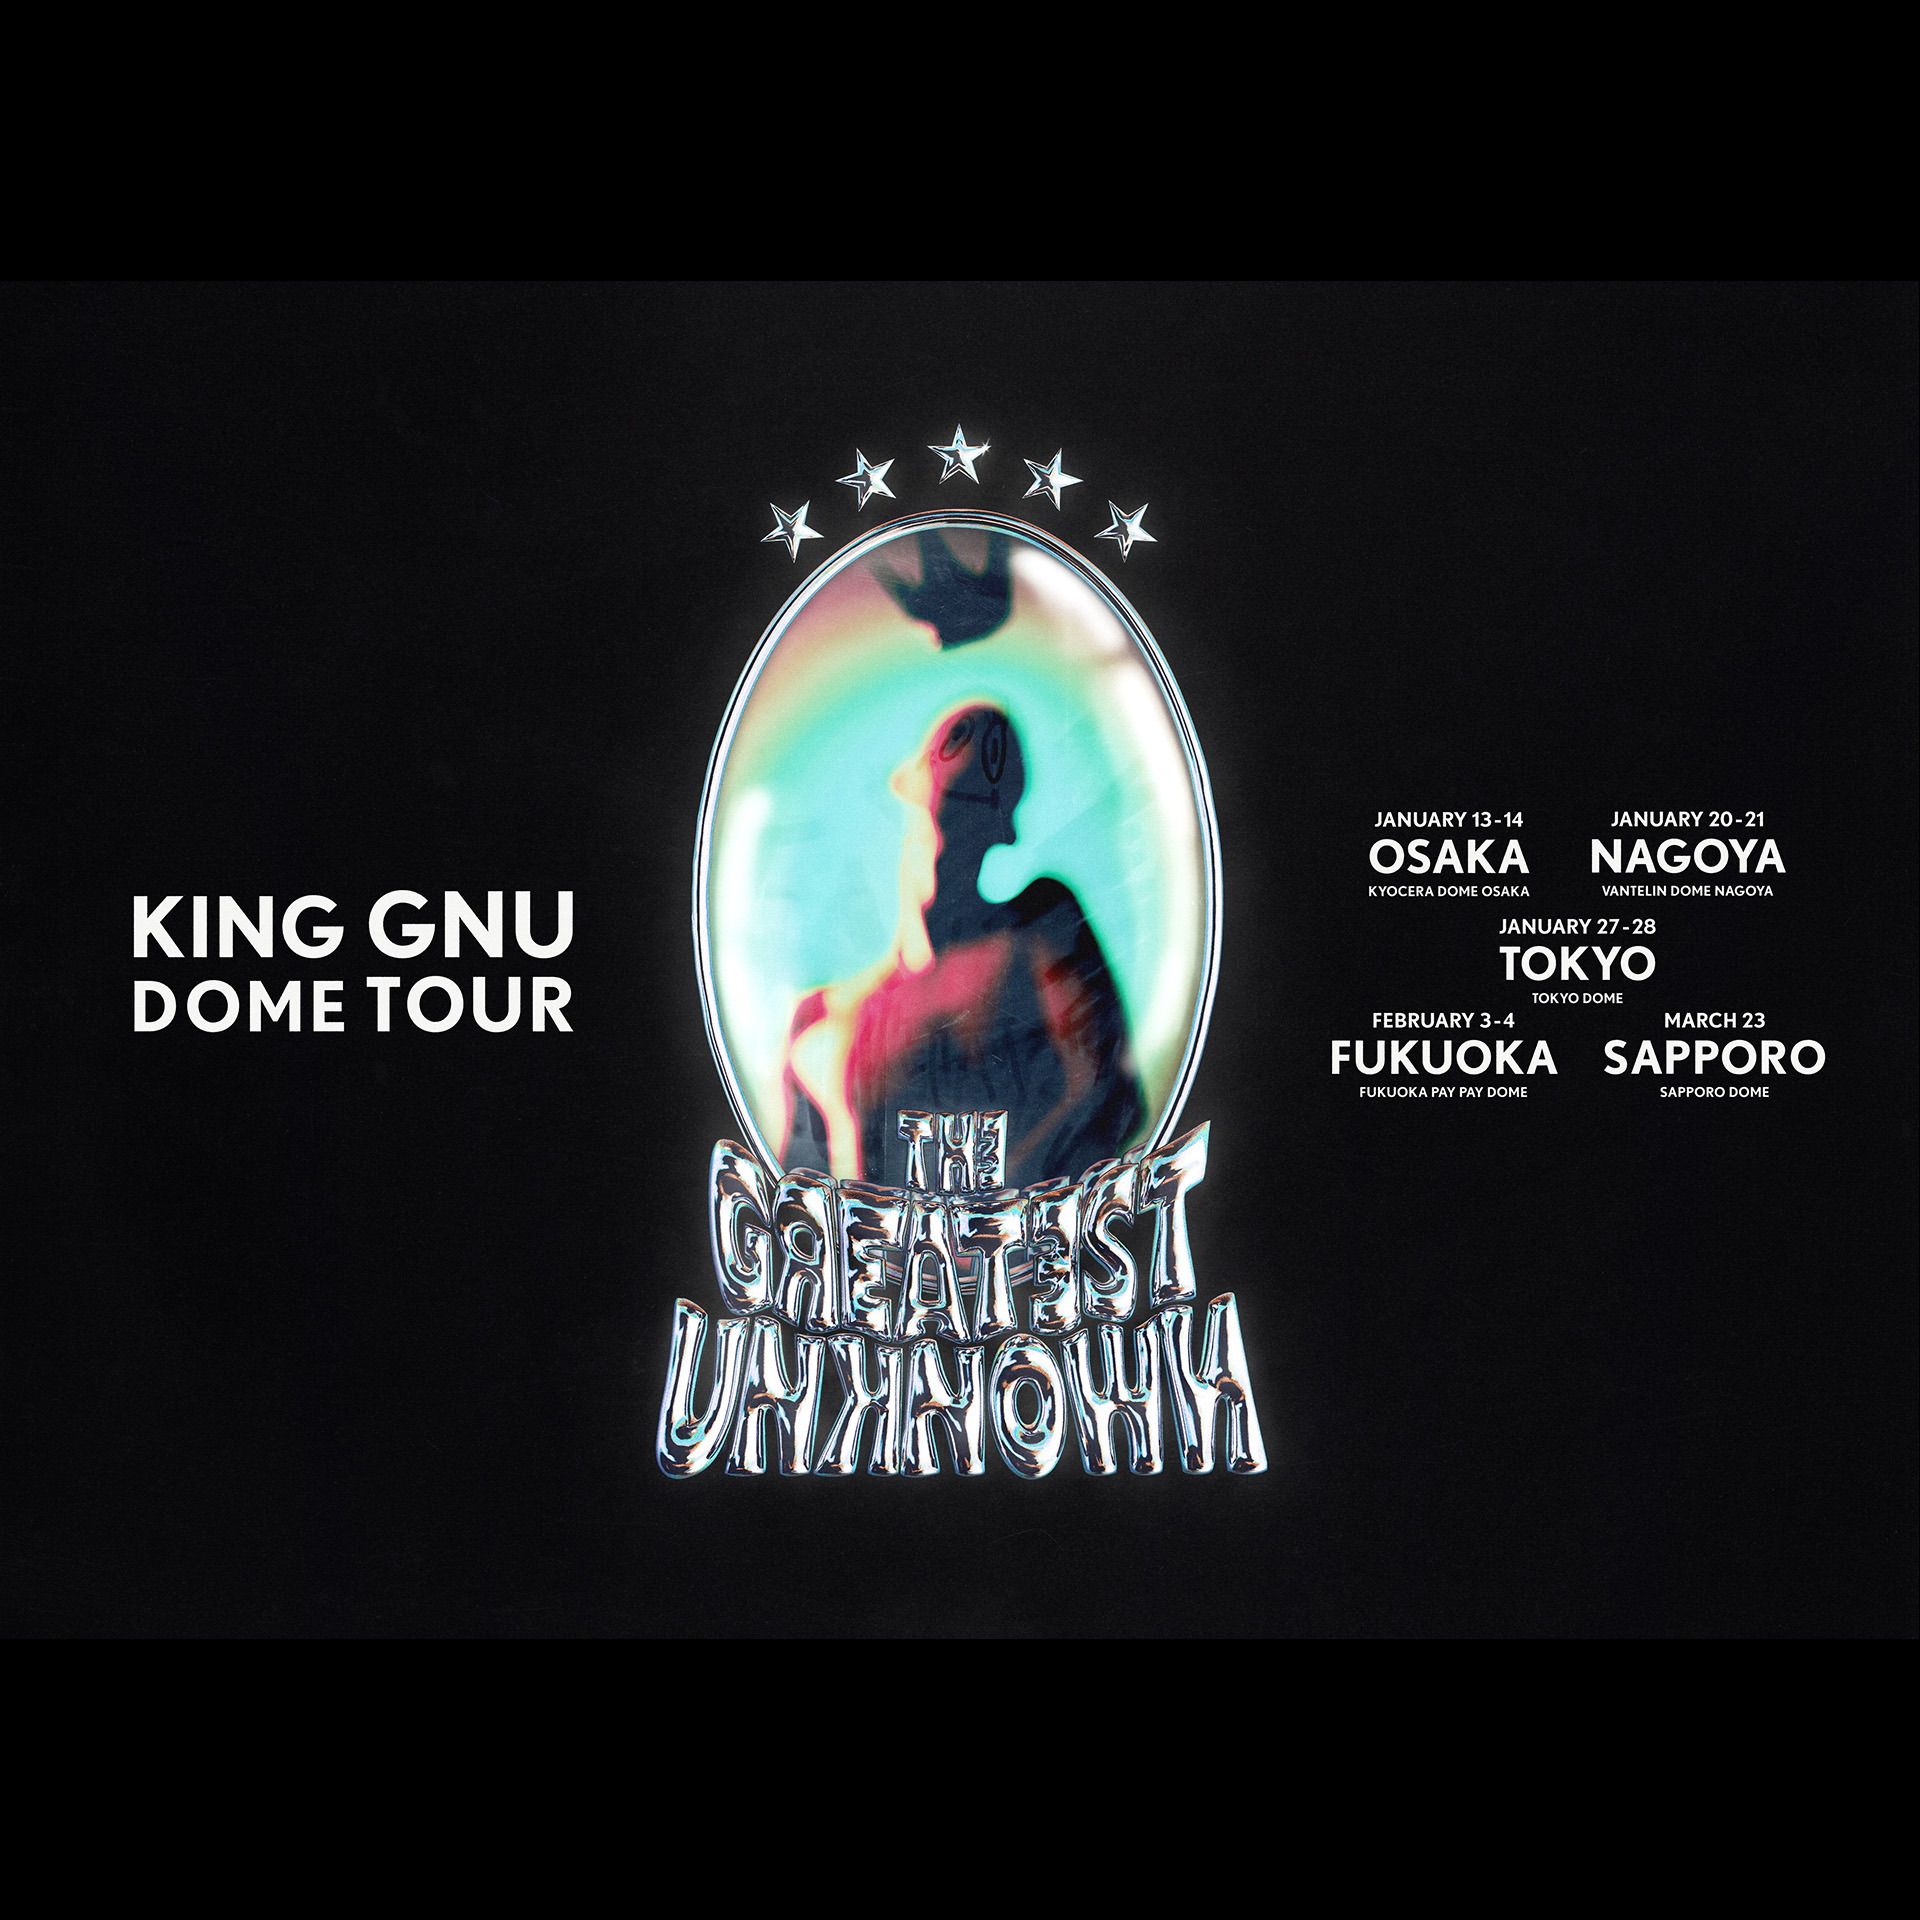 King Gnu Dome Tour『THE GREATEST UNKNOWN』 チケット受付特設サイト 